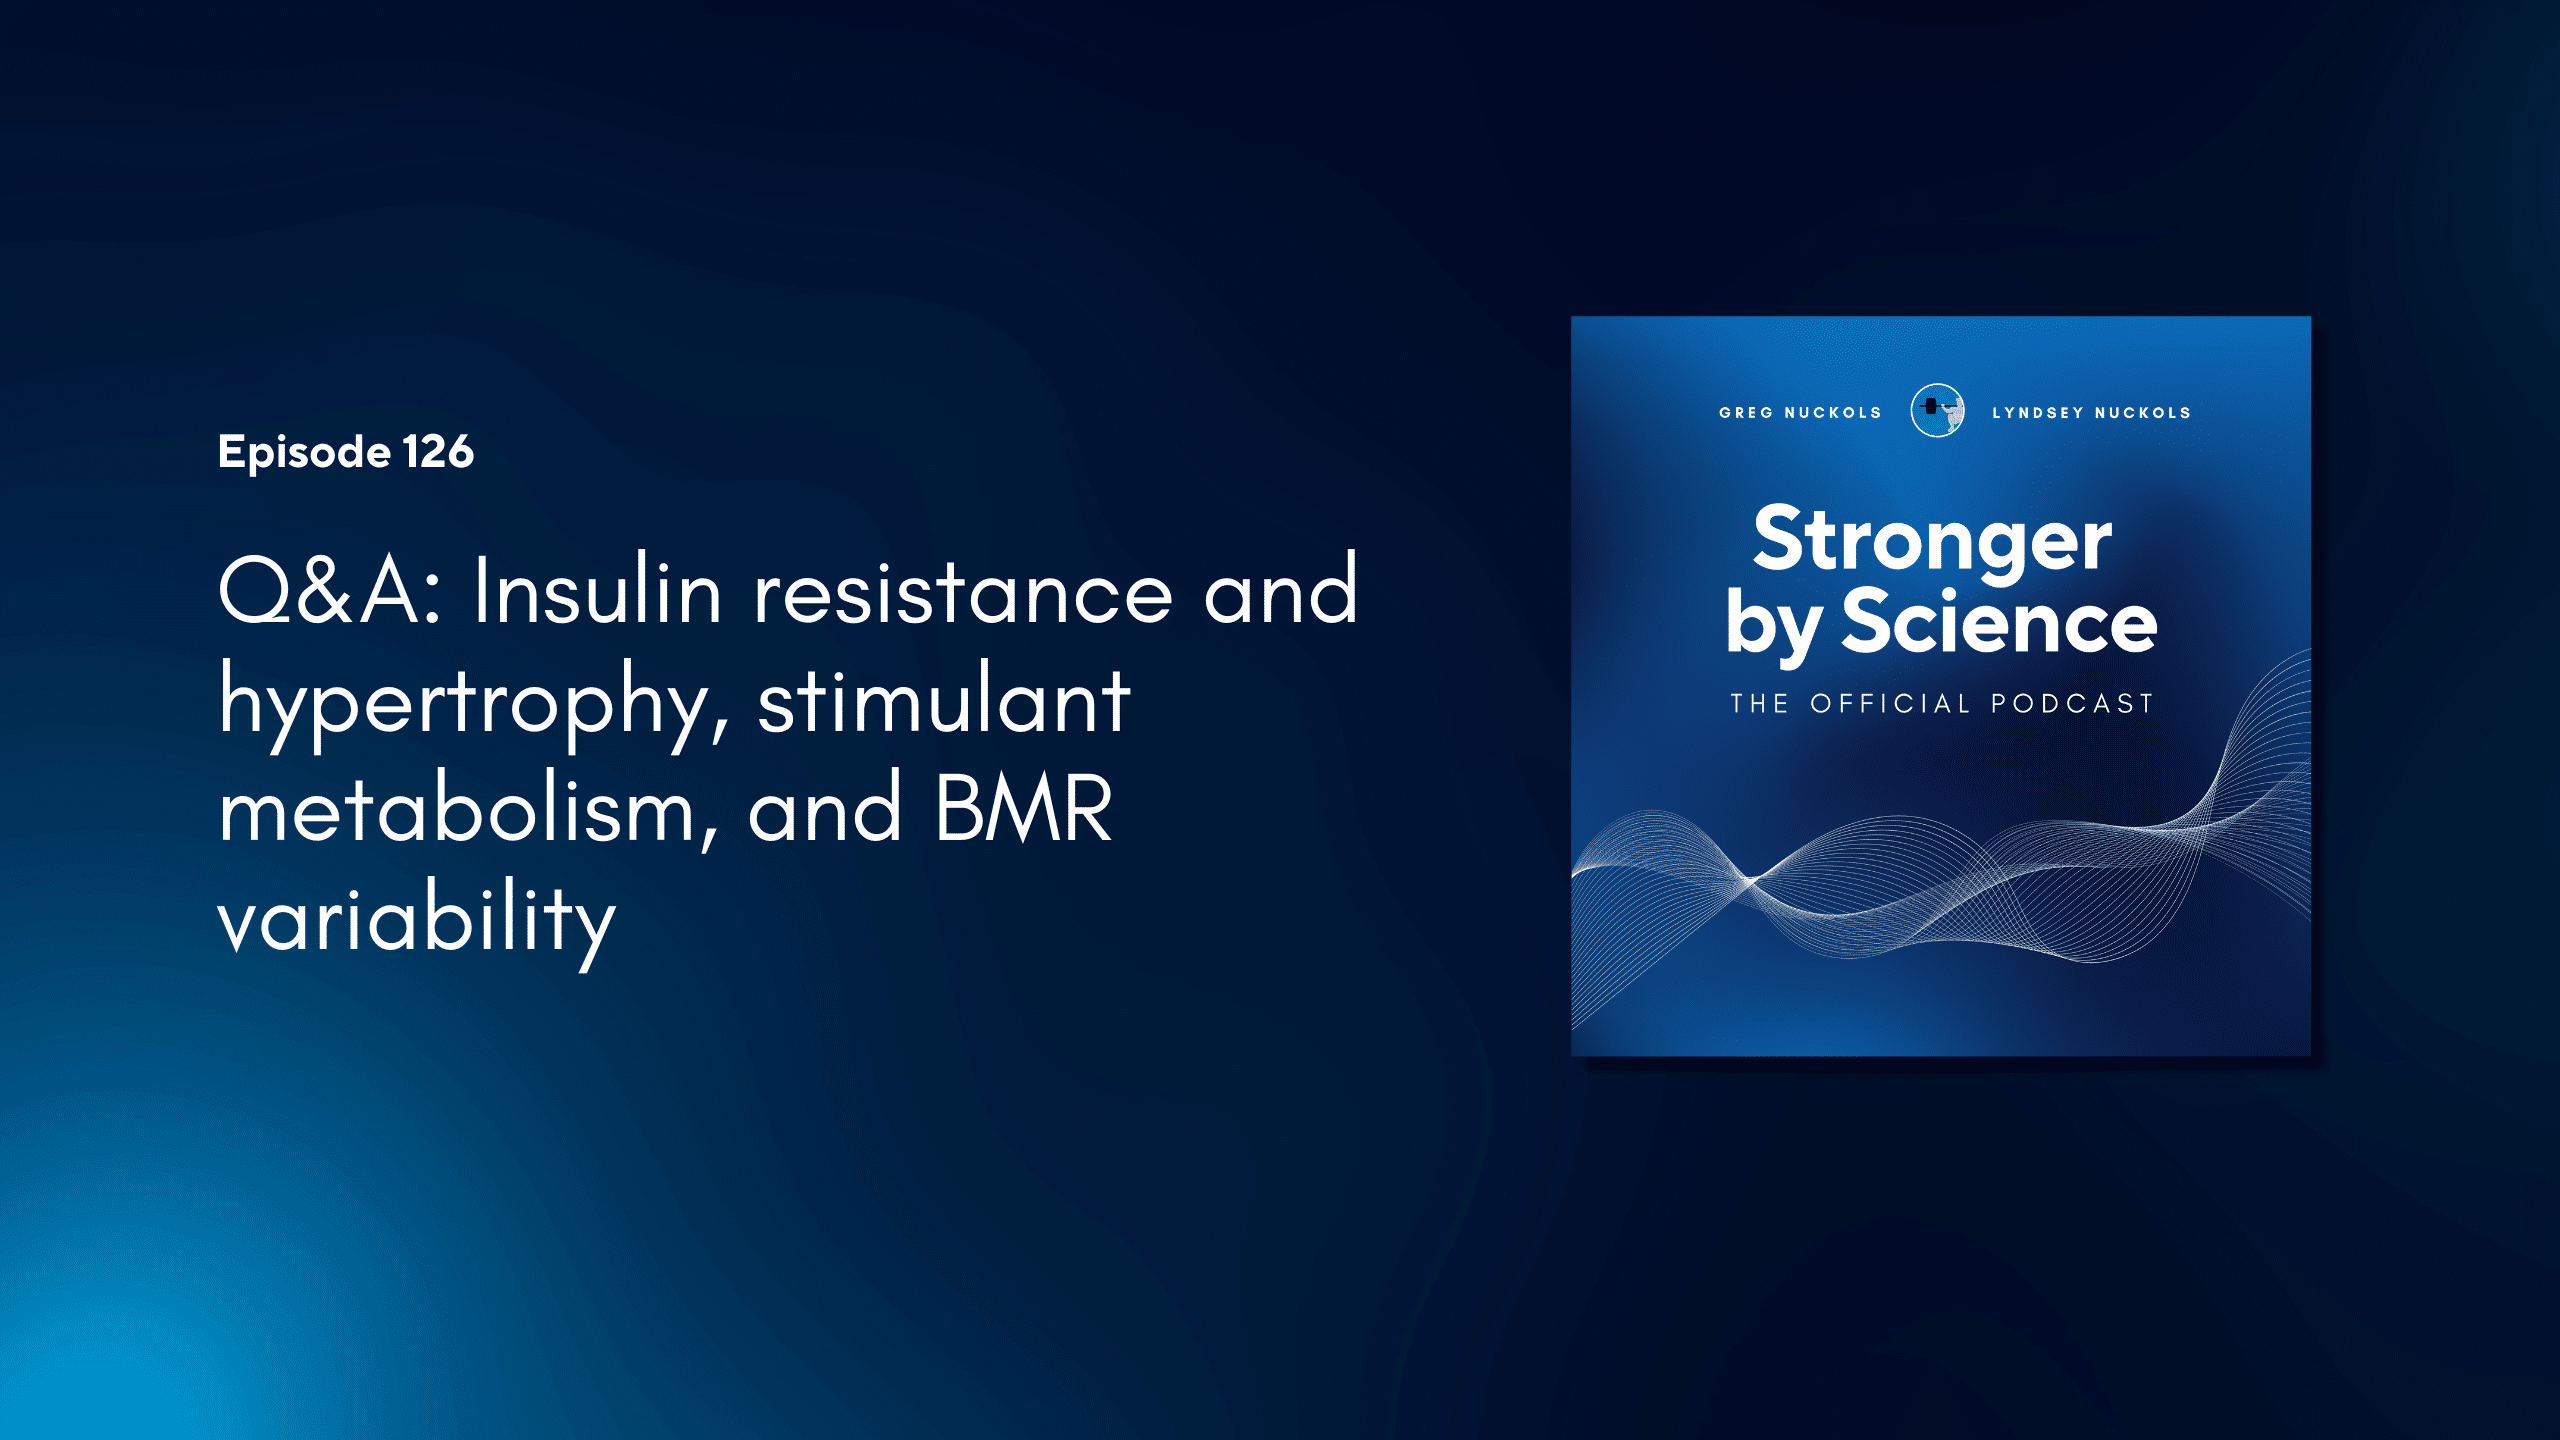 Photo of Q&A: Insulin resistance and hypertrophy, stimulant metabolism, and BMR variability